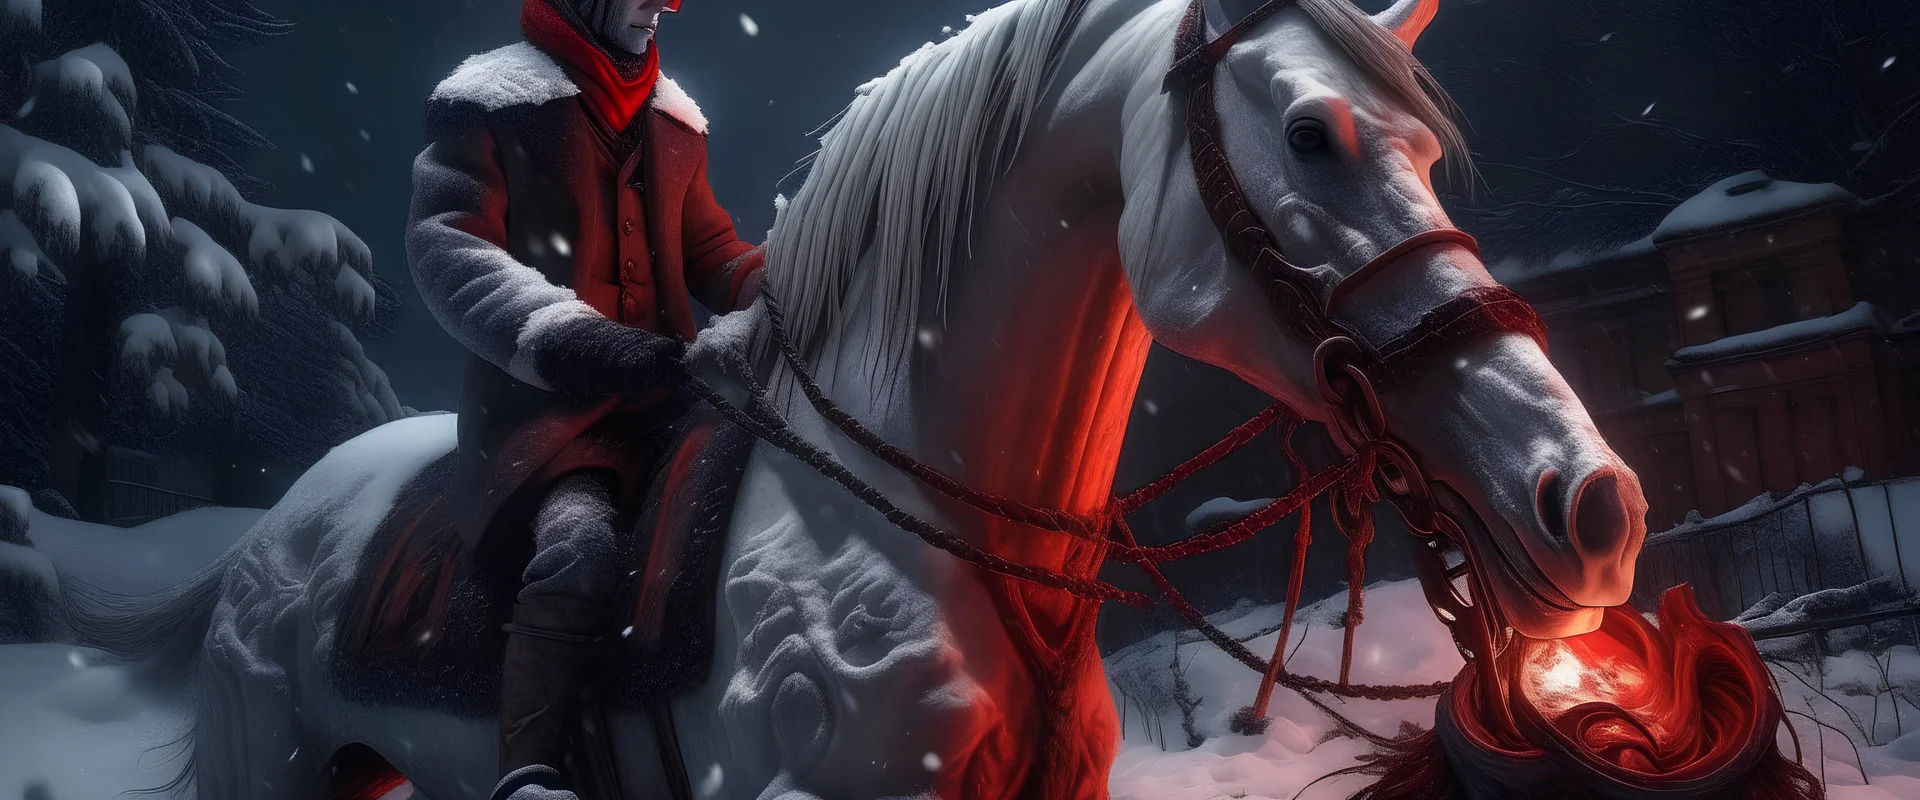 victorian era, a dead horse buried under the snow, its rider bead by its side, also covered in snow. strange red alien moss with tentacles cover the horse, it is an alien organism feeding on the horse remains, Victorian street on fire . Apocalyptic, epic, photo-realistic, widescreen, cinematic, epic, like a movie